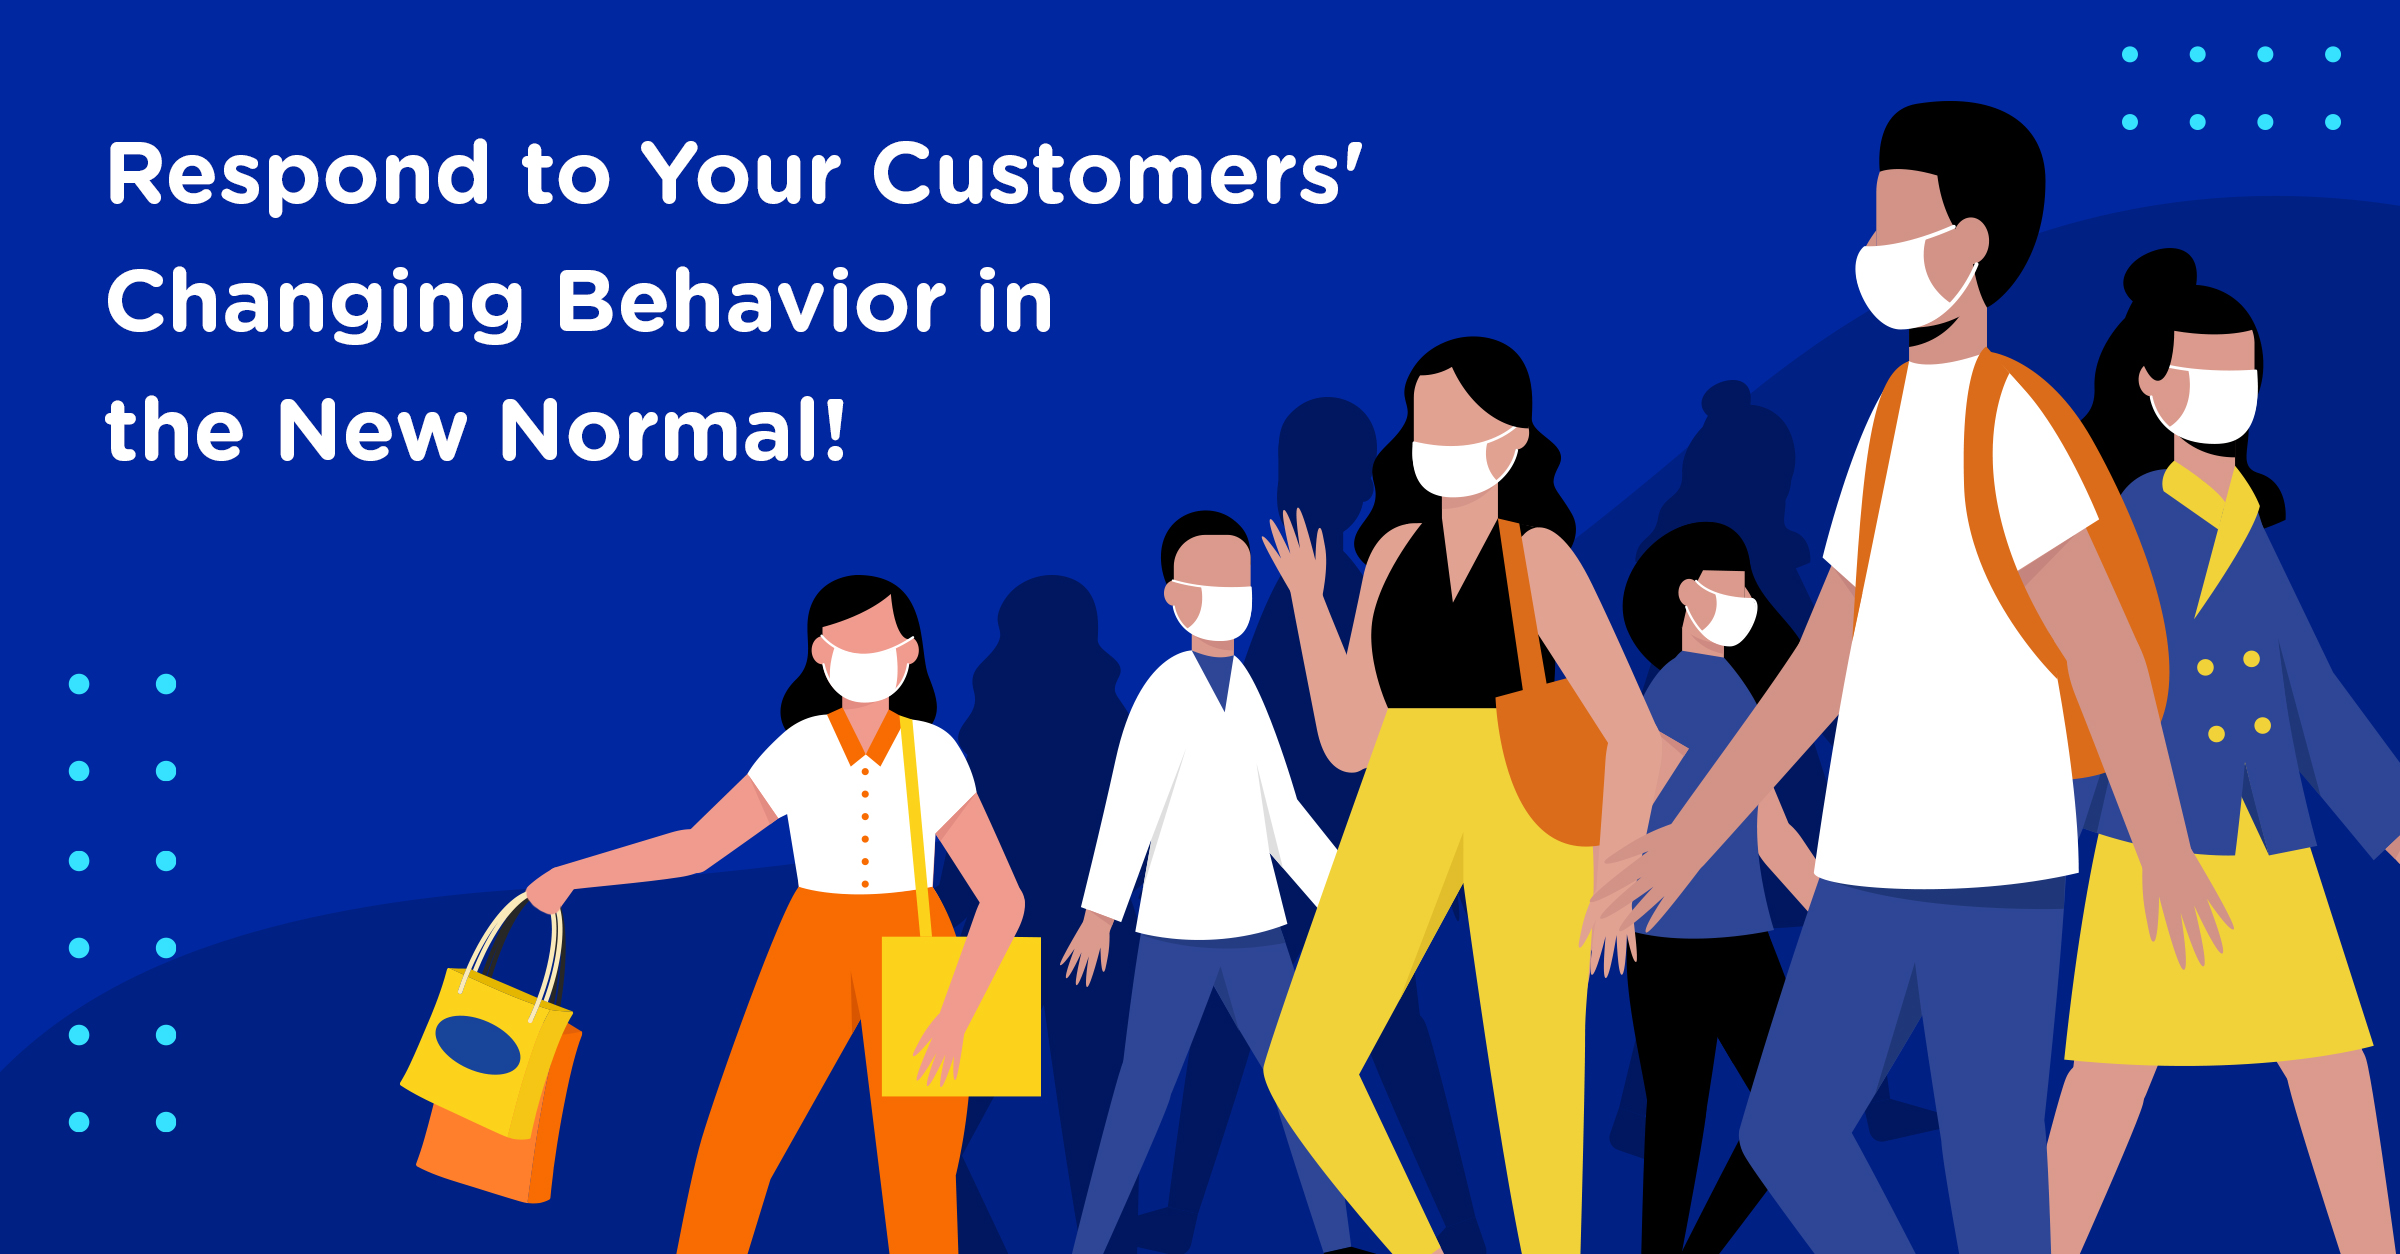 Your Customers are Rethinking Their Behavior for the New Normal-Find Out How You Should Respond